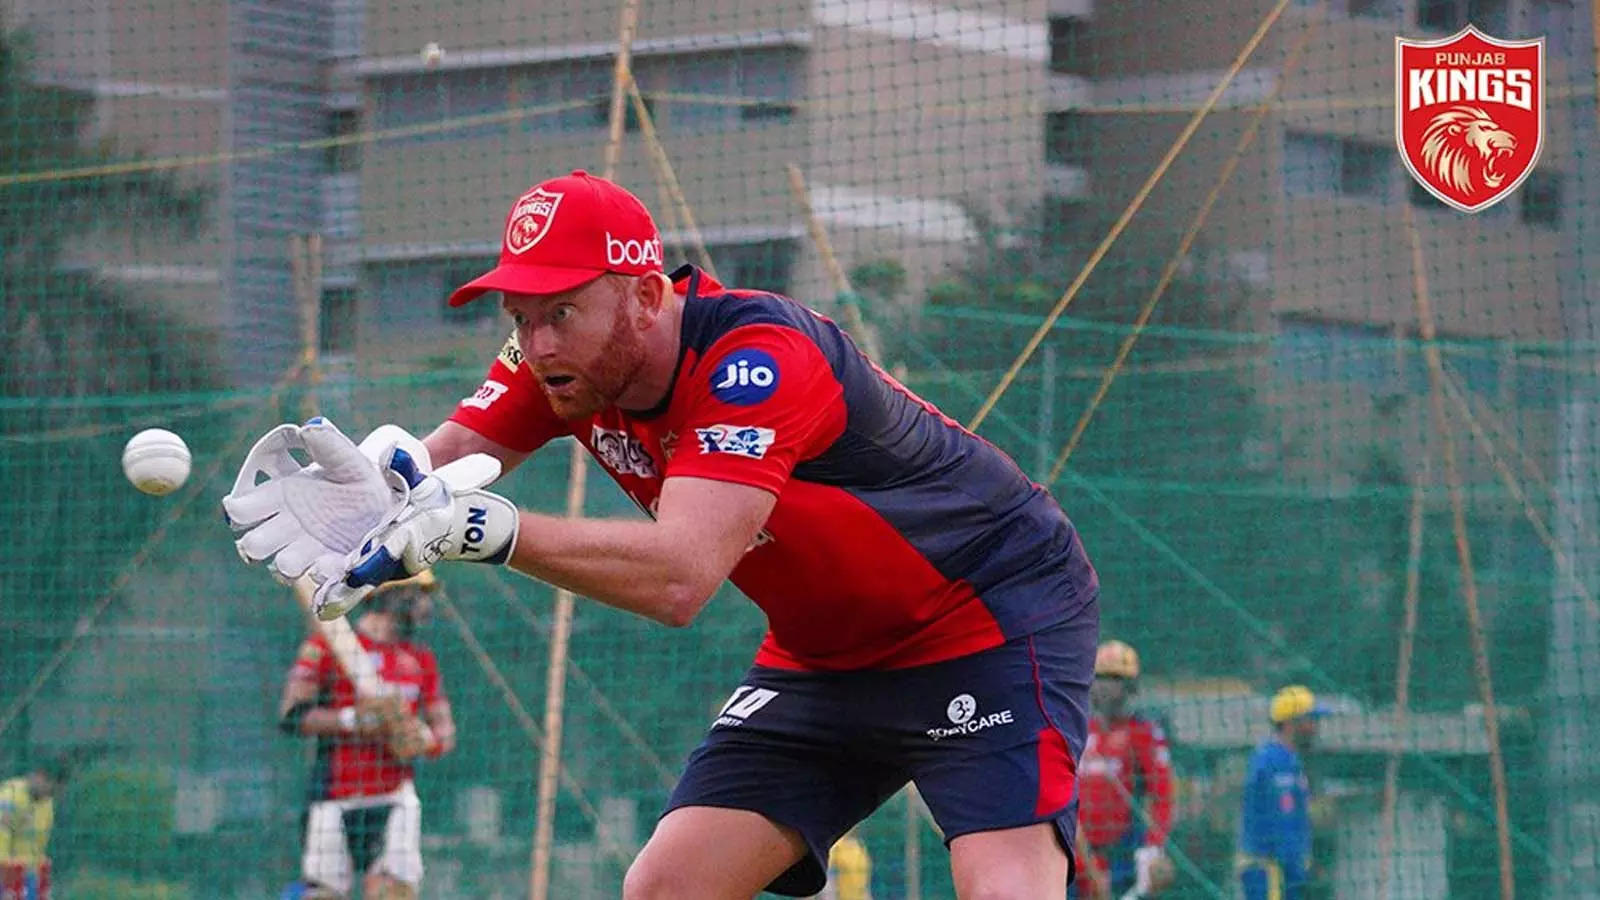 Jonny Bairstow could be included in PBKS XI against GT